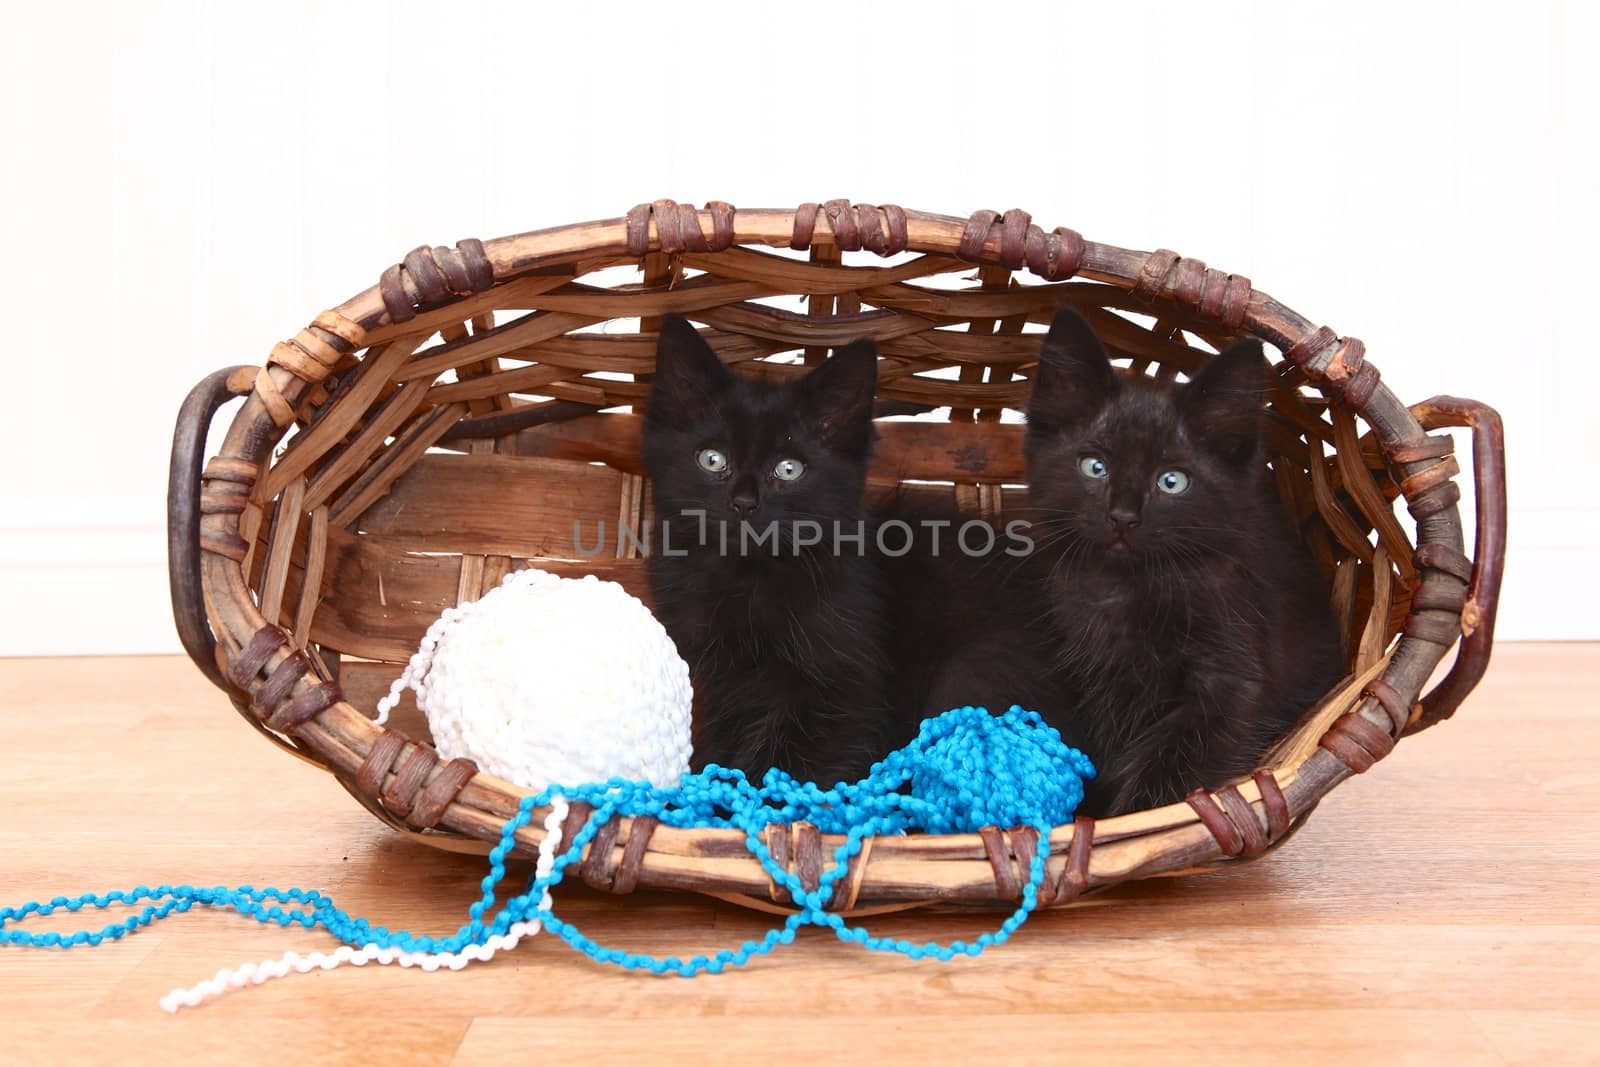 Curious Kittens Inside a Basket on White by tobkatrina